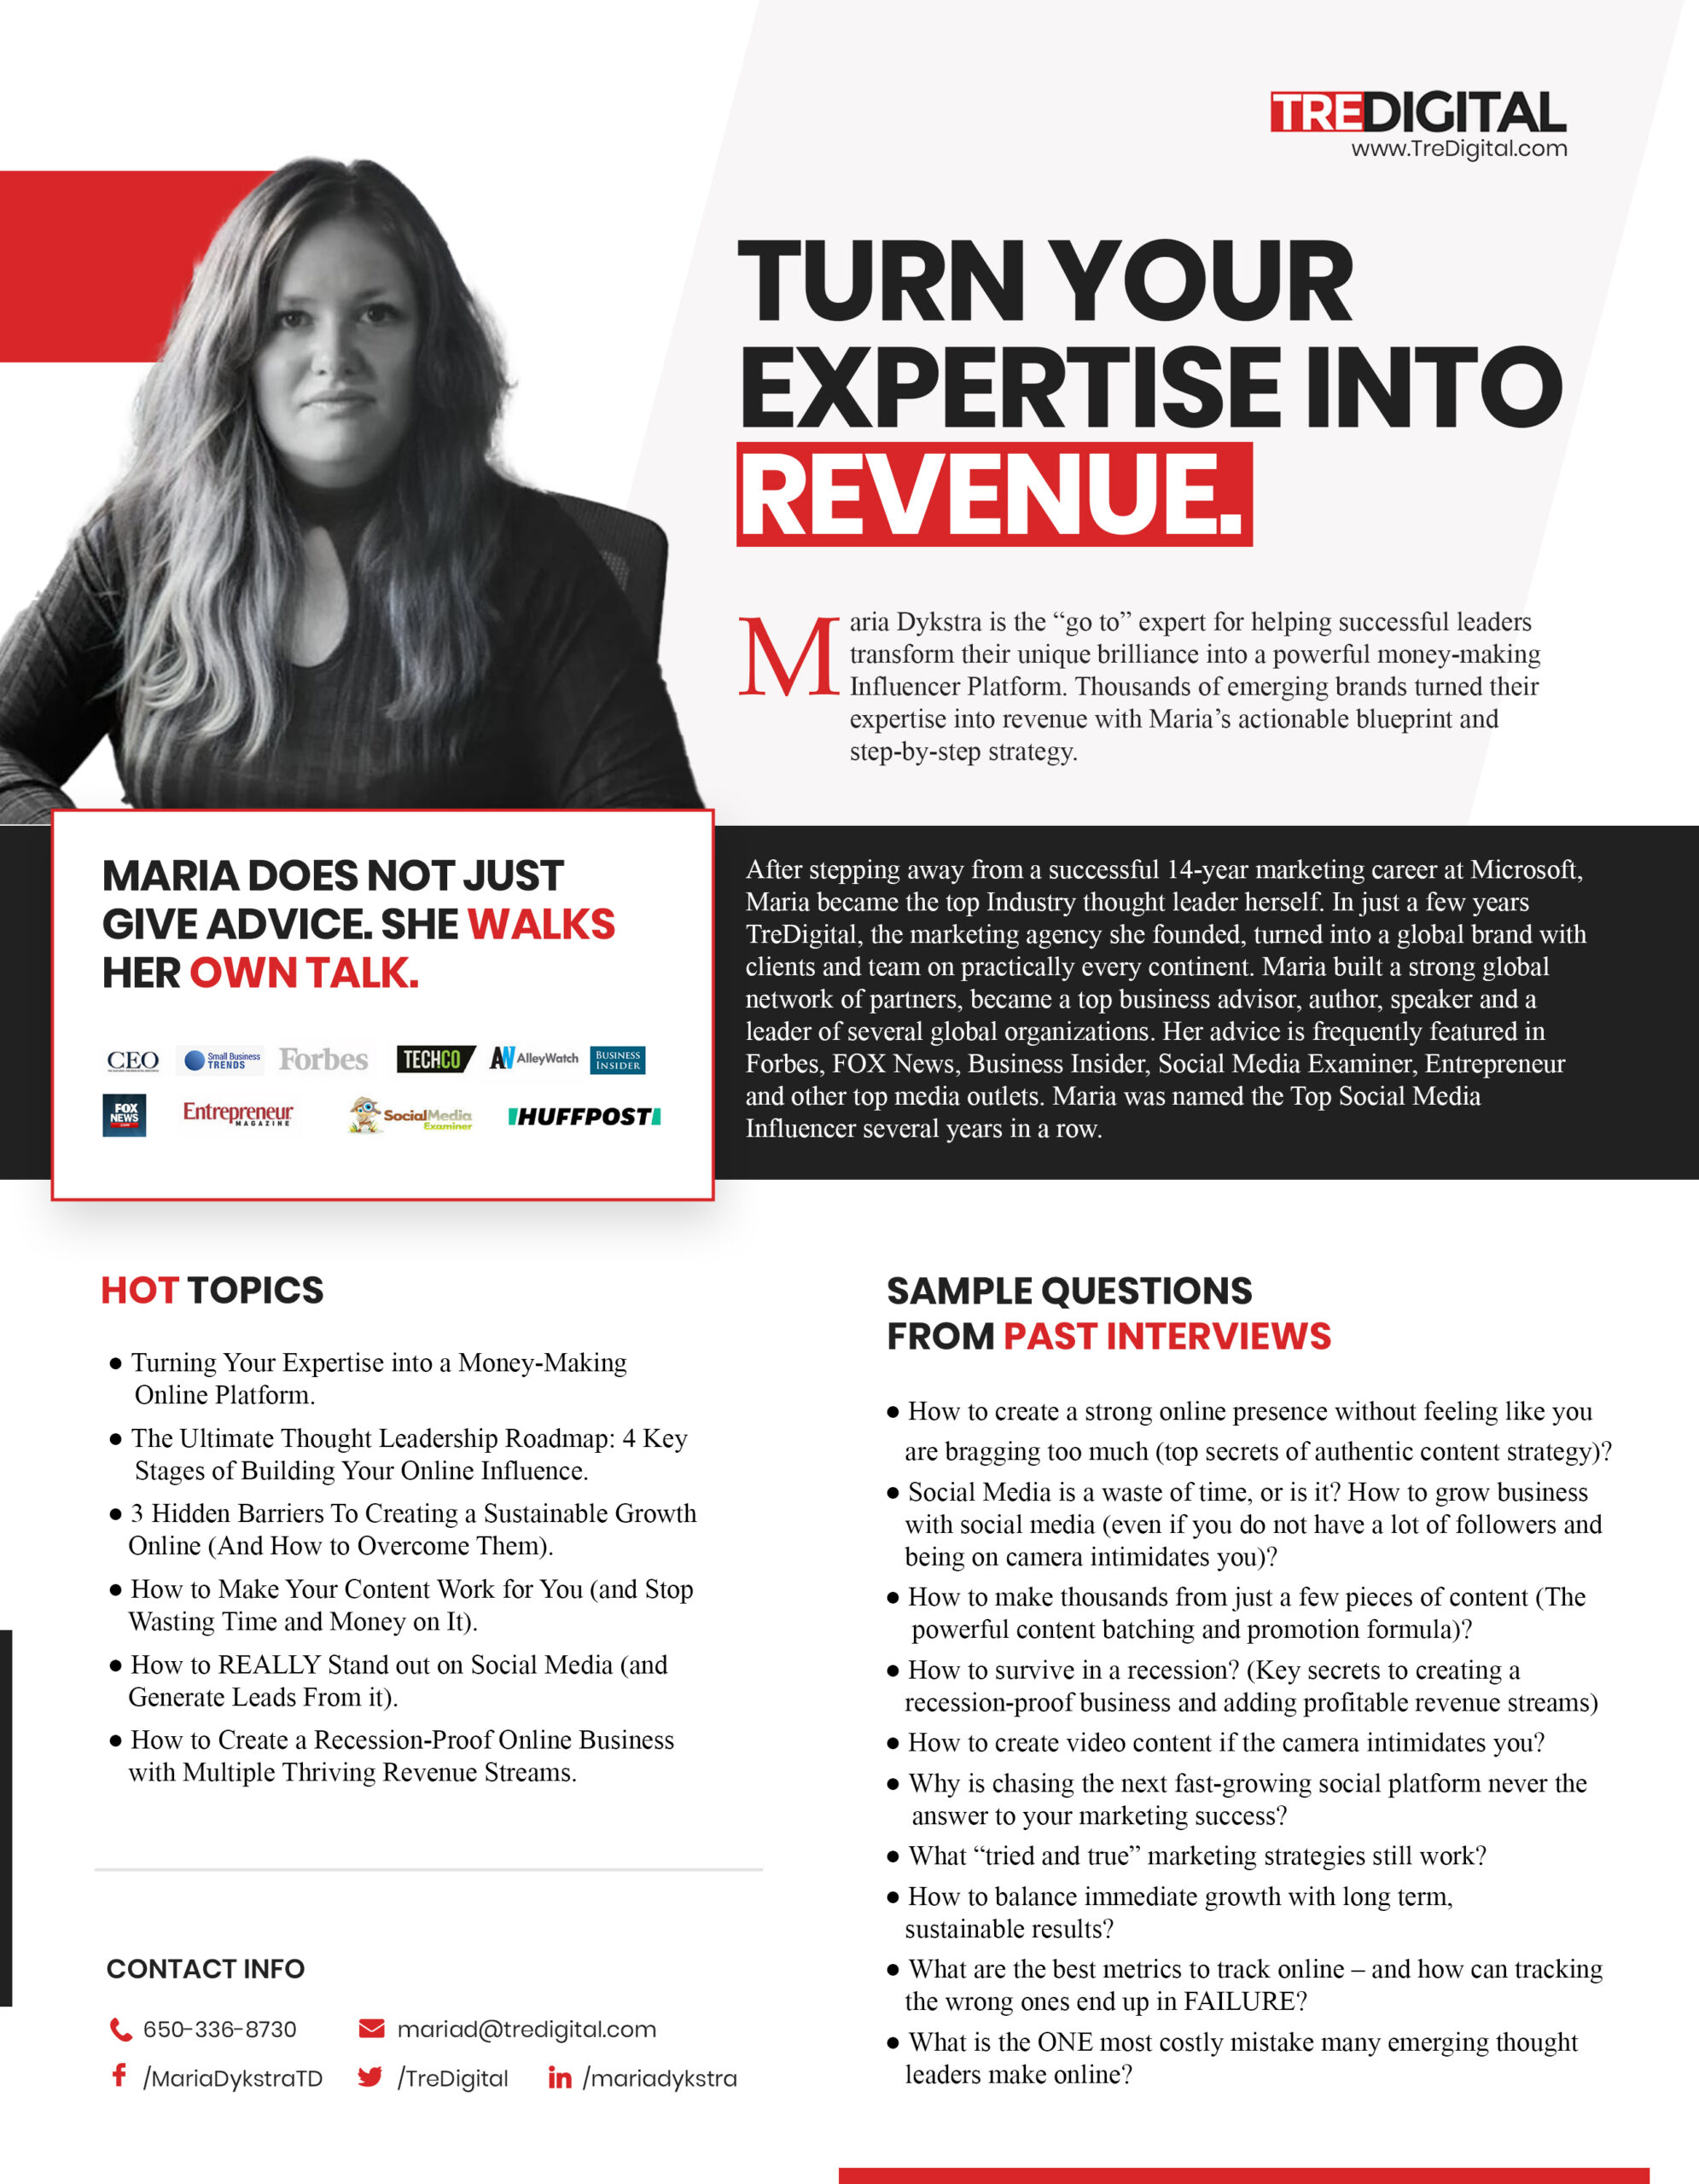 Turn Your Expertise Into Revenue